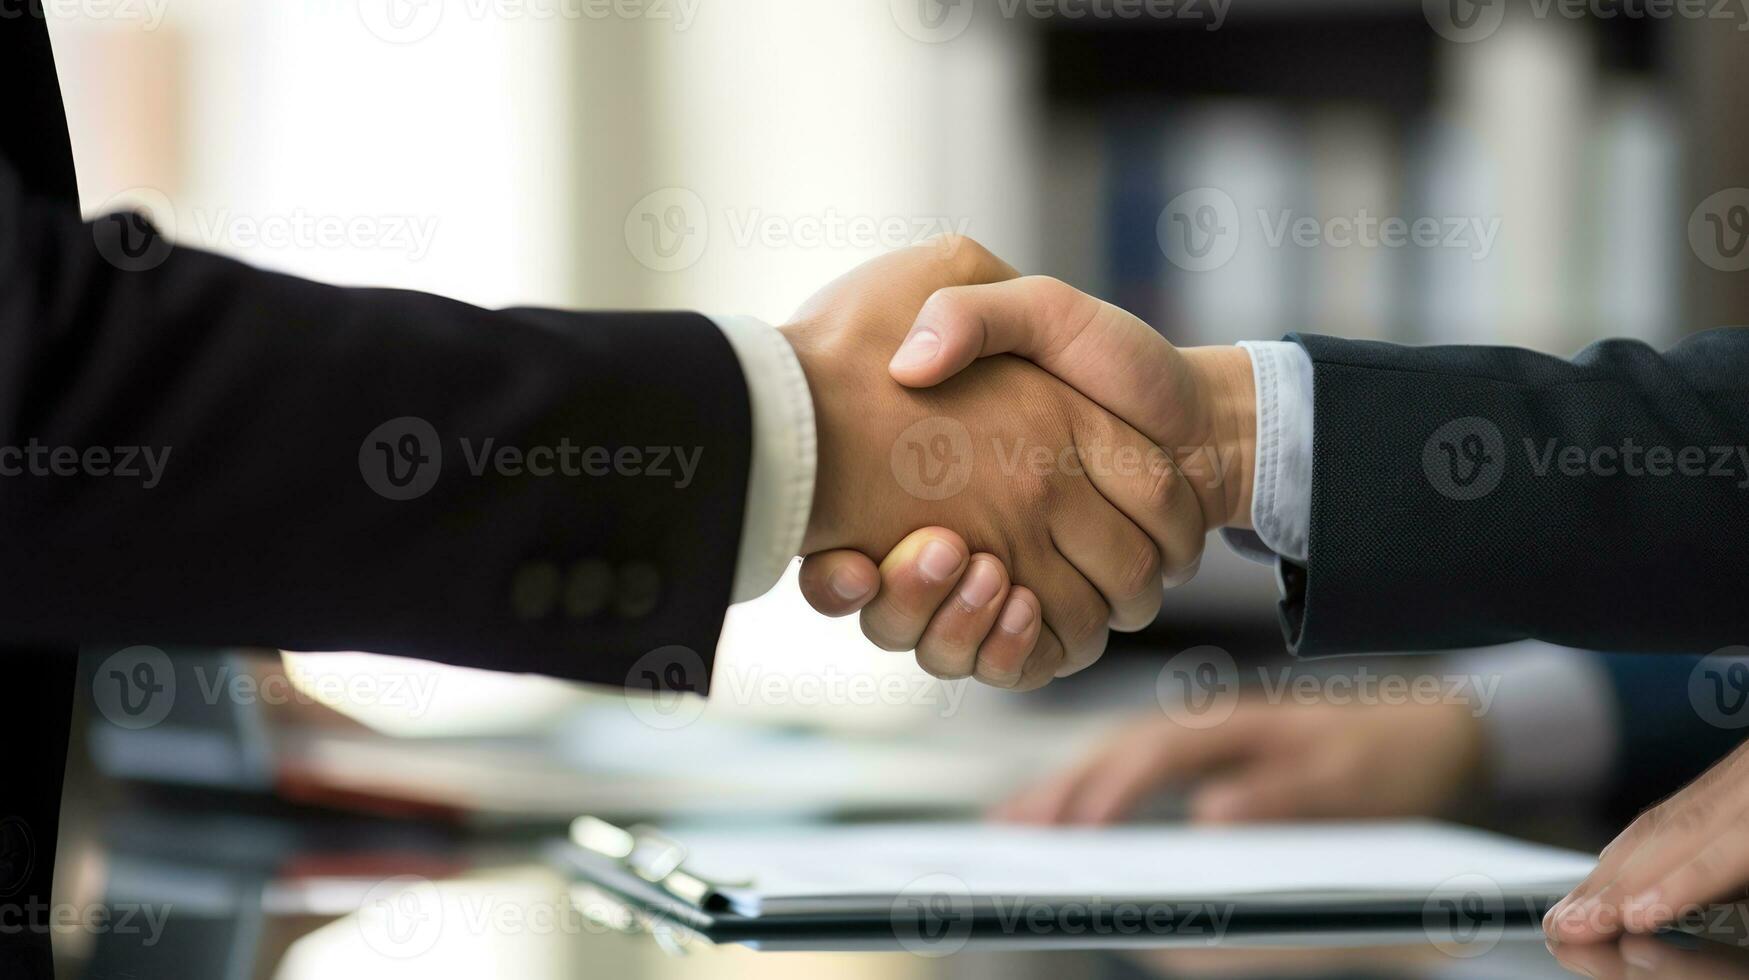 During a successful gathering, associates exchanged firm handshakes, symbolizing the strength of collaboration and unity. photo